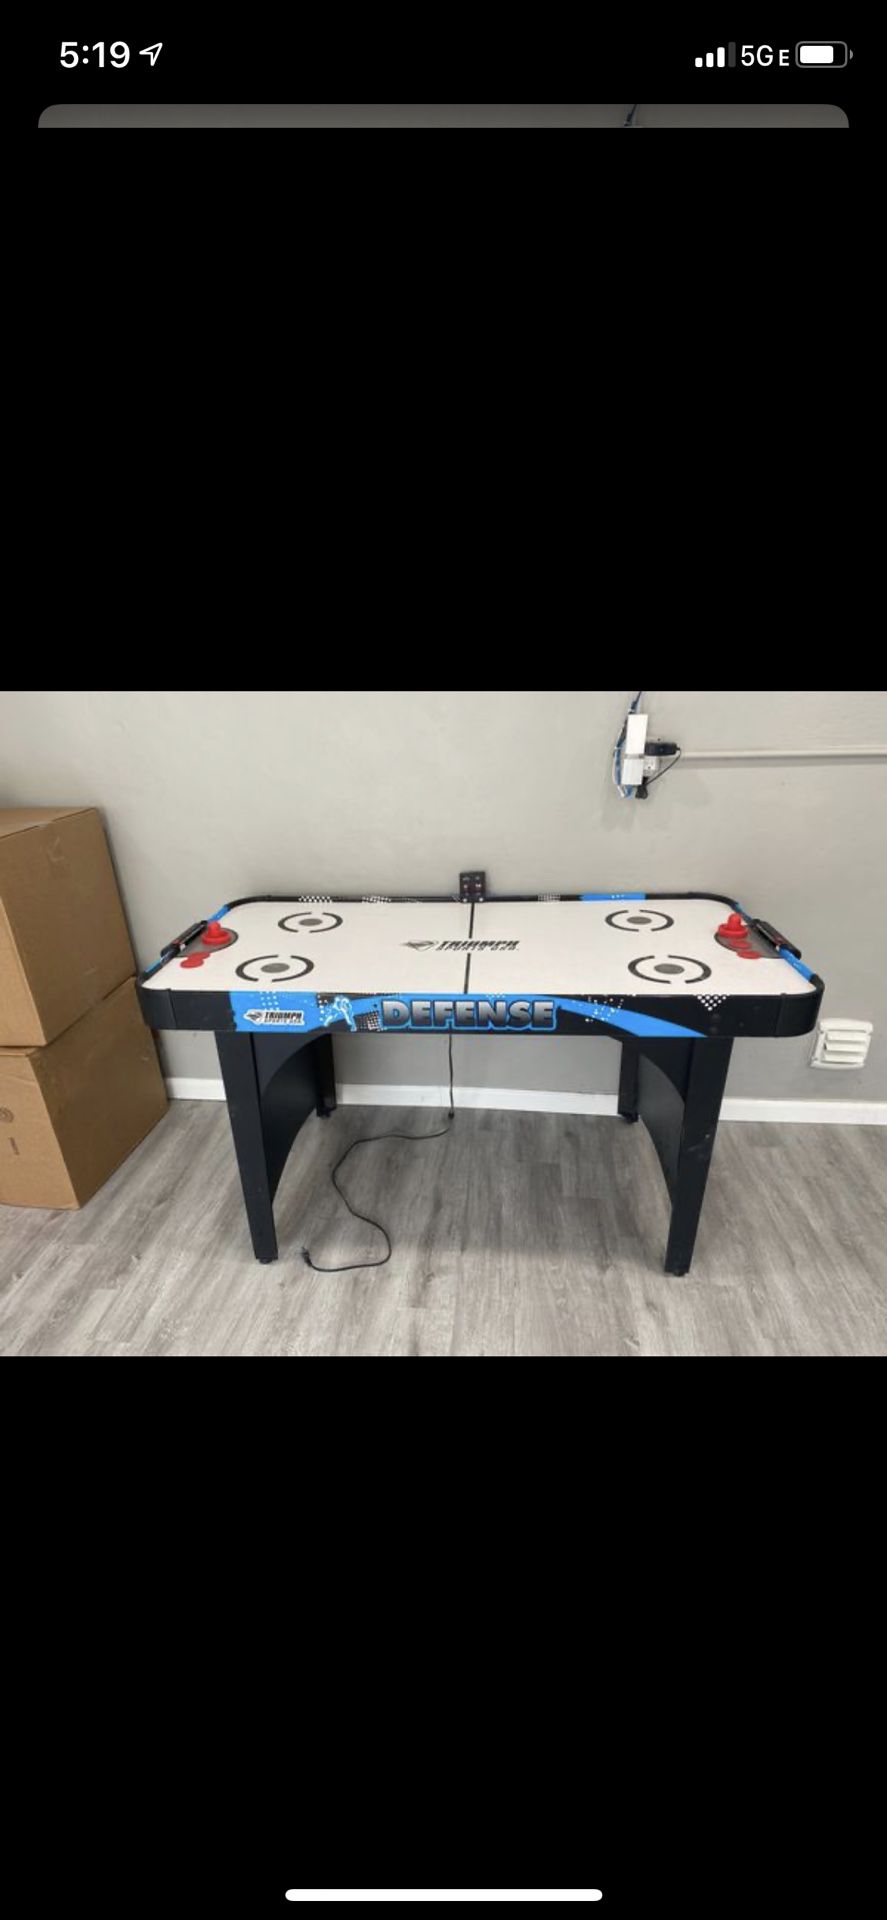 Triumph Air Hockey Table 5ft x 2.5ft (60inch x 30inch)with score board